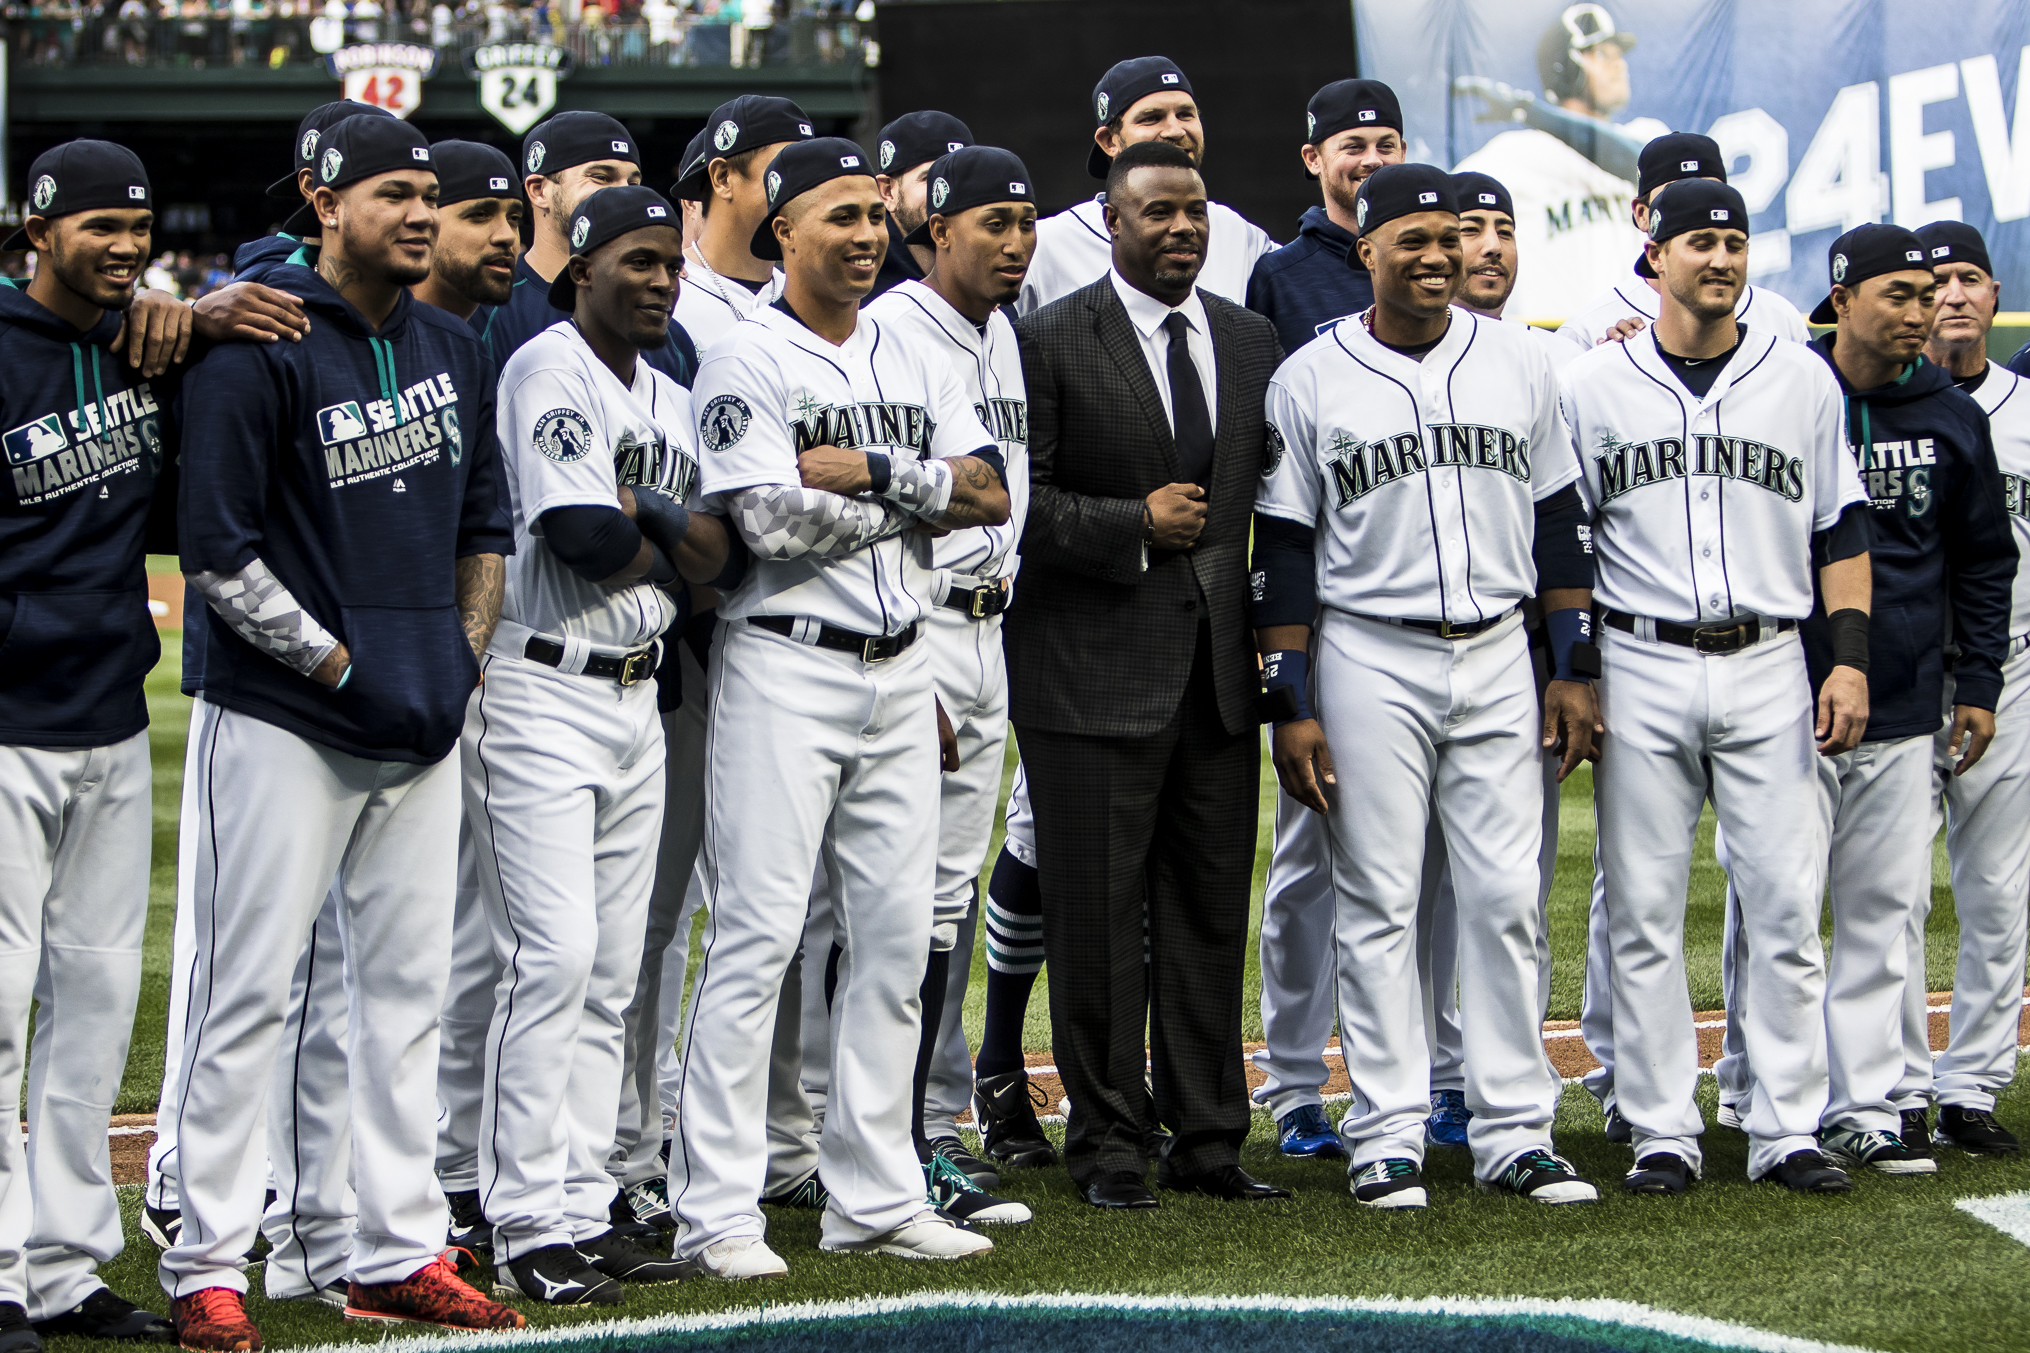 Should Robinson Cano be allowed to wear Ken Griffey Jr.'s No. 24 in  Seattle? No way